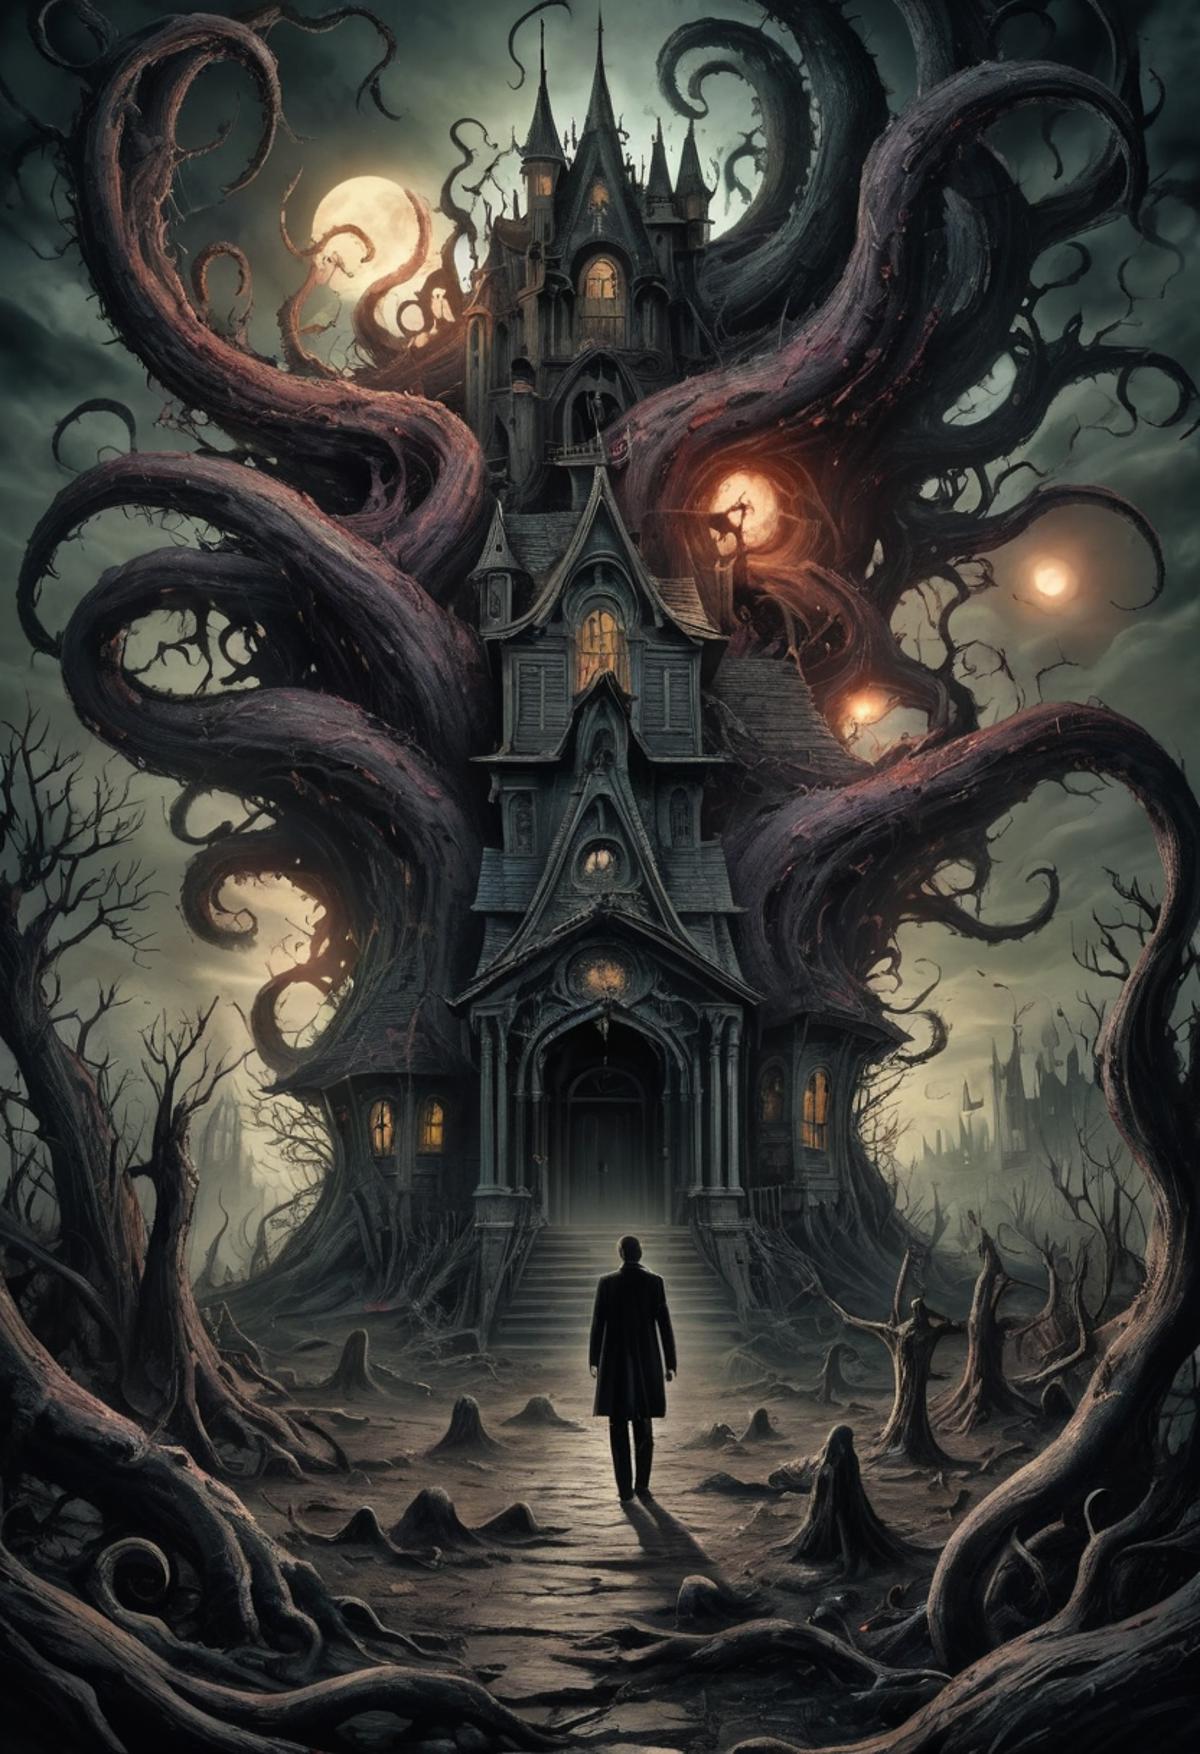 A man standing in front of a haunting mansion with a giant tree and an octopus.